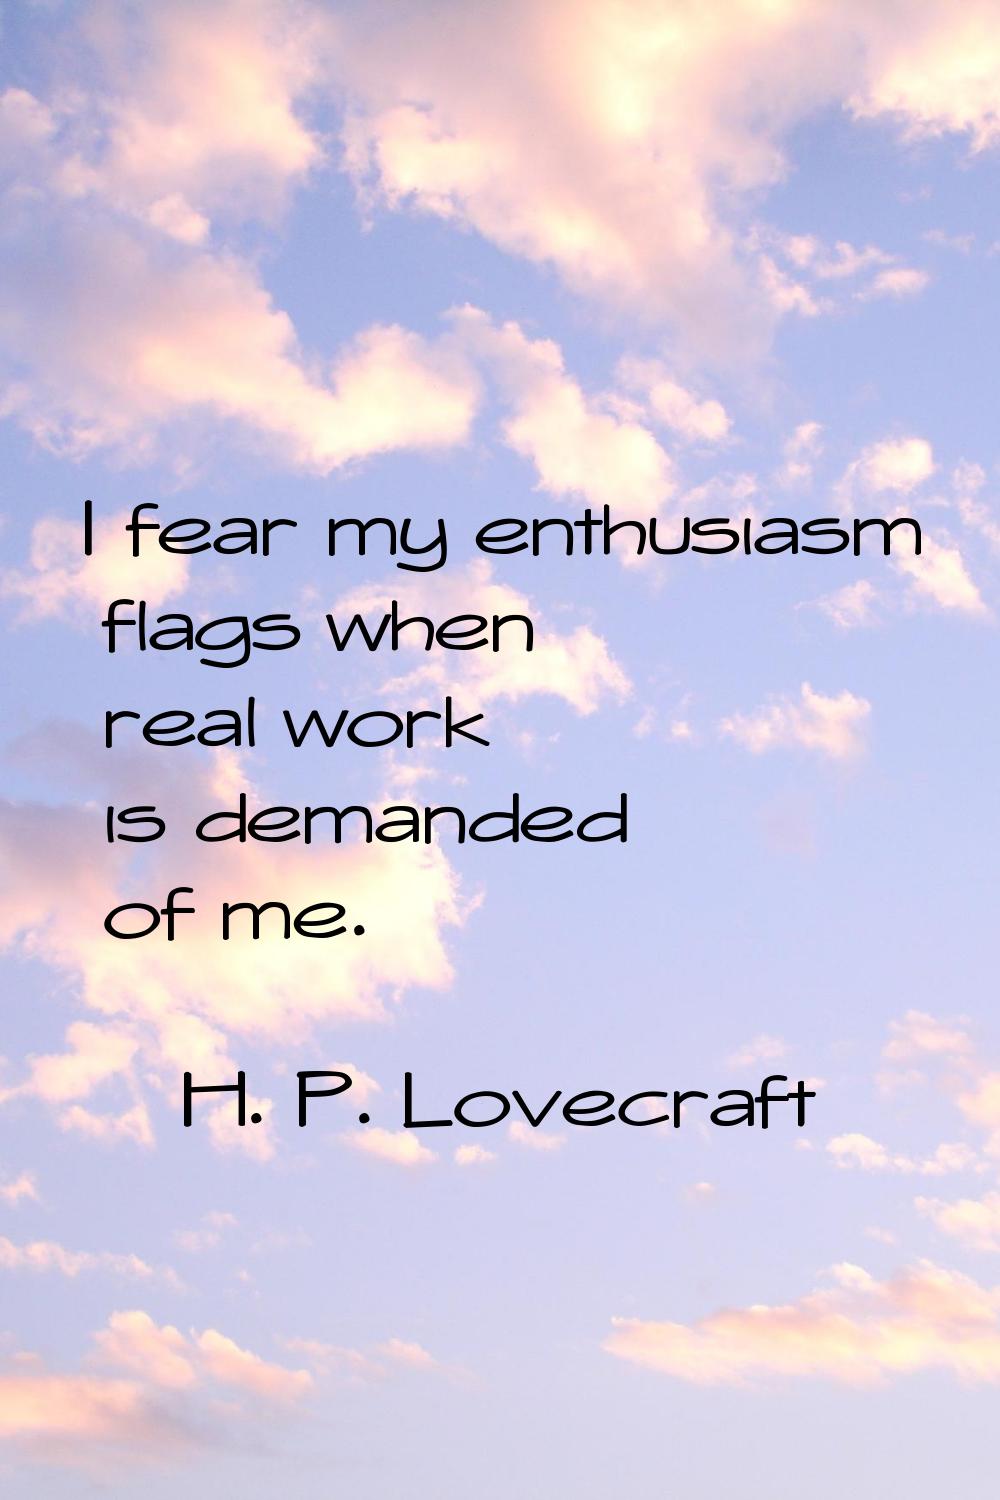 I fear my enthusiasm flags when real work is demanded of me.